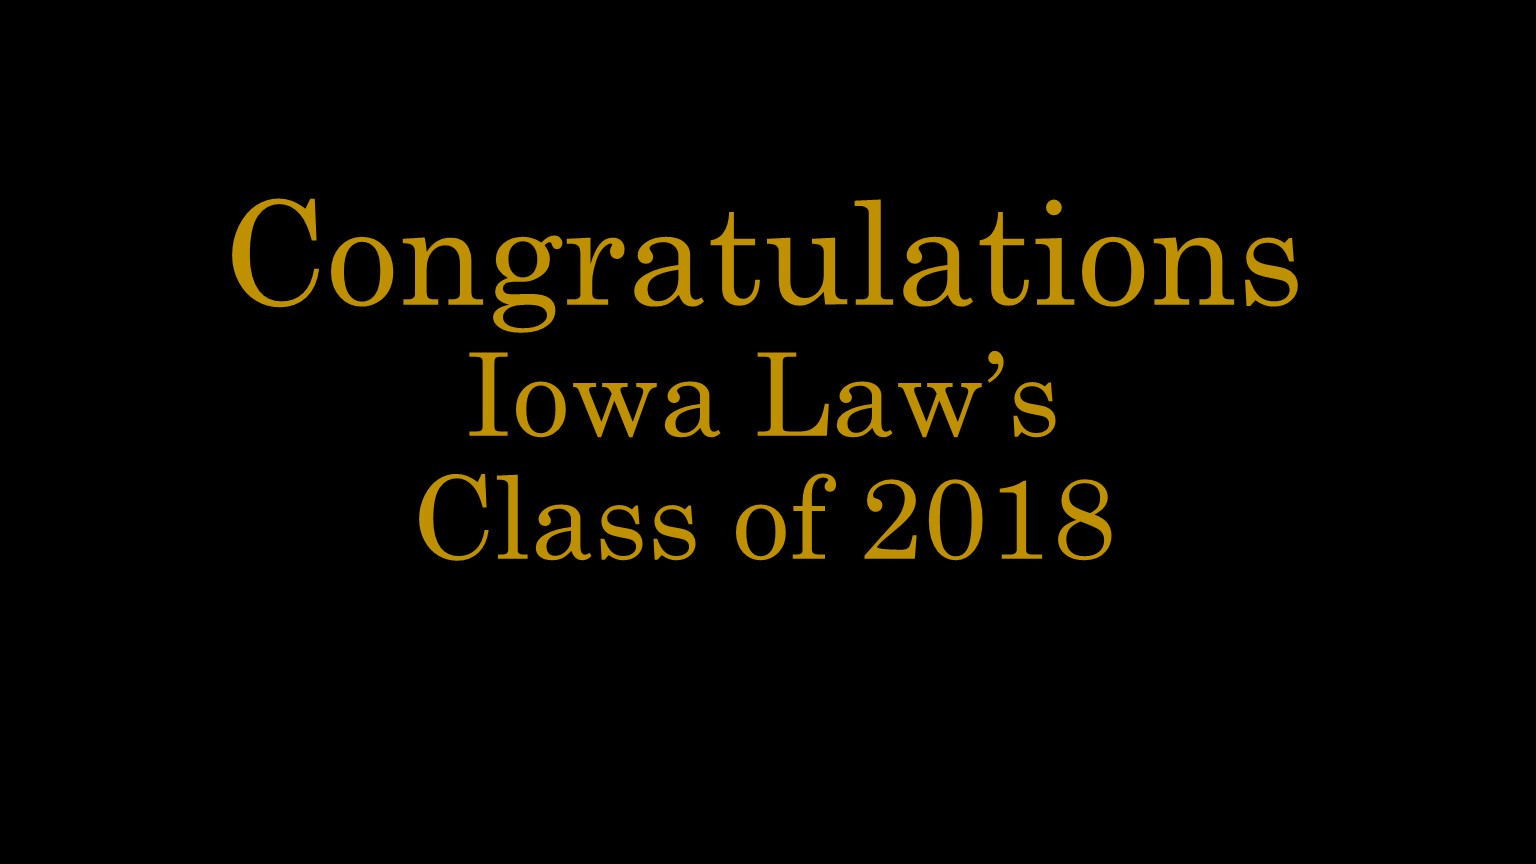 Congratulations to Iowa Law's Class of 2018